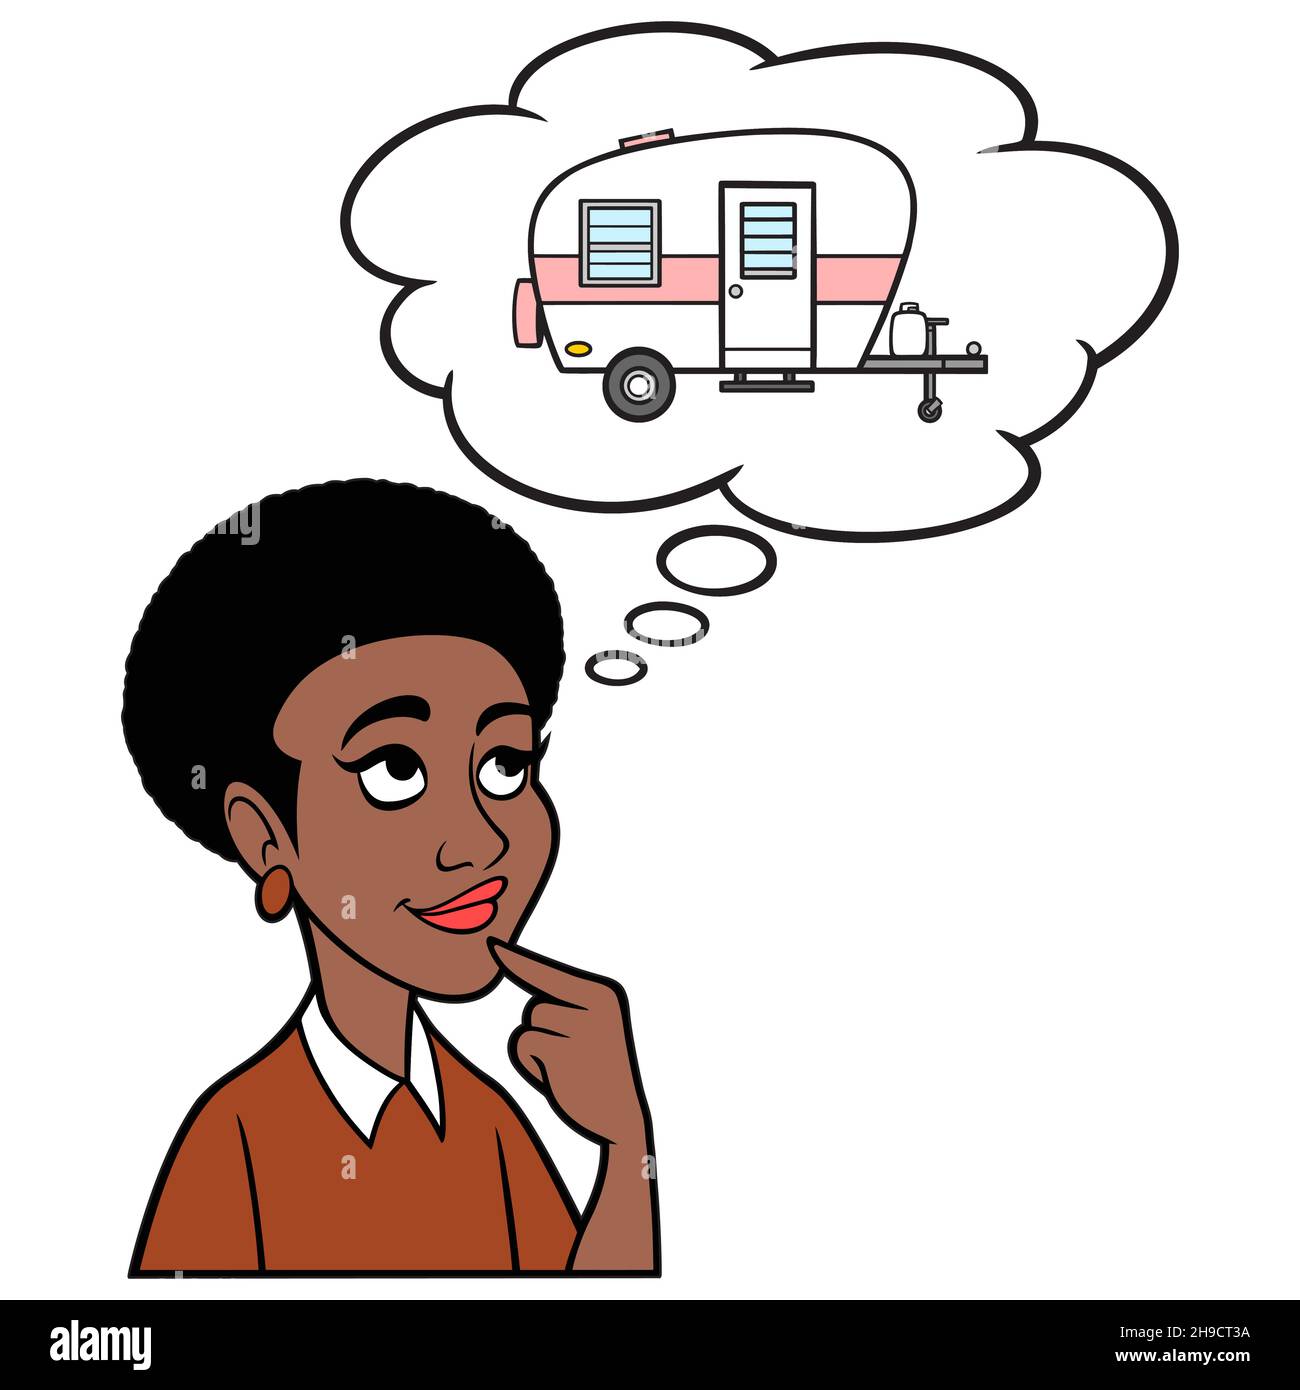 Black Woman thinking about a Camper - A cartoon illustration of a Black Woman thinking about going a Camping vacation. Stock Vector